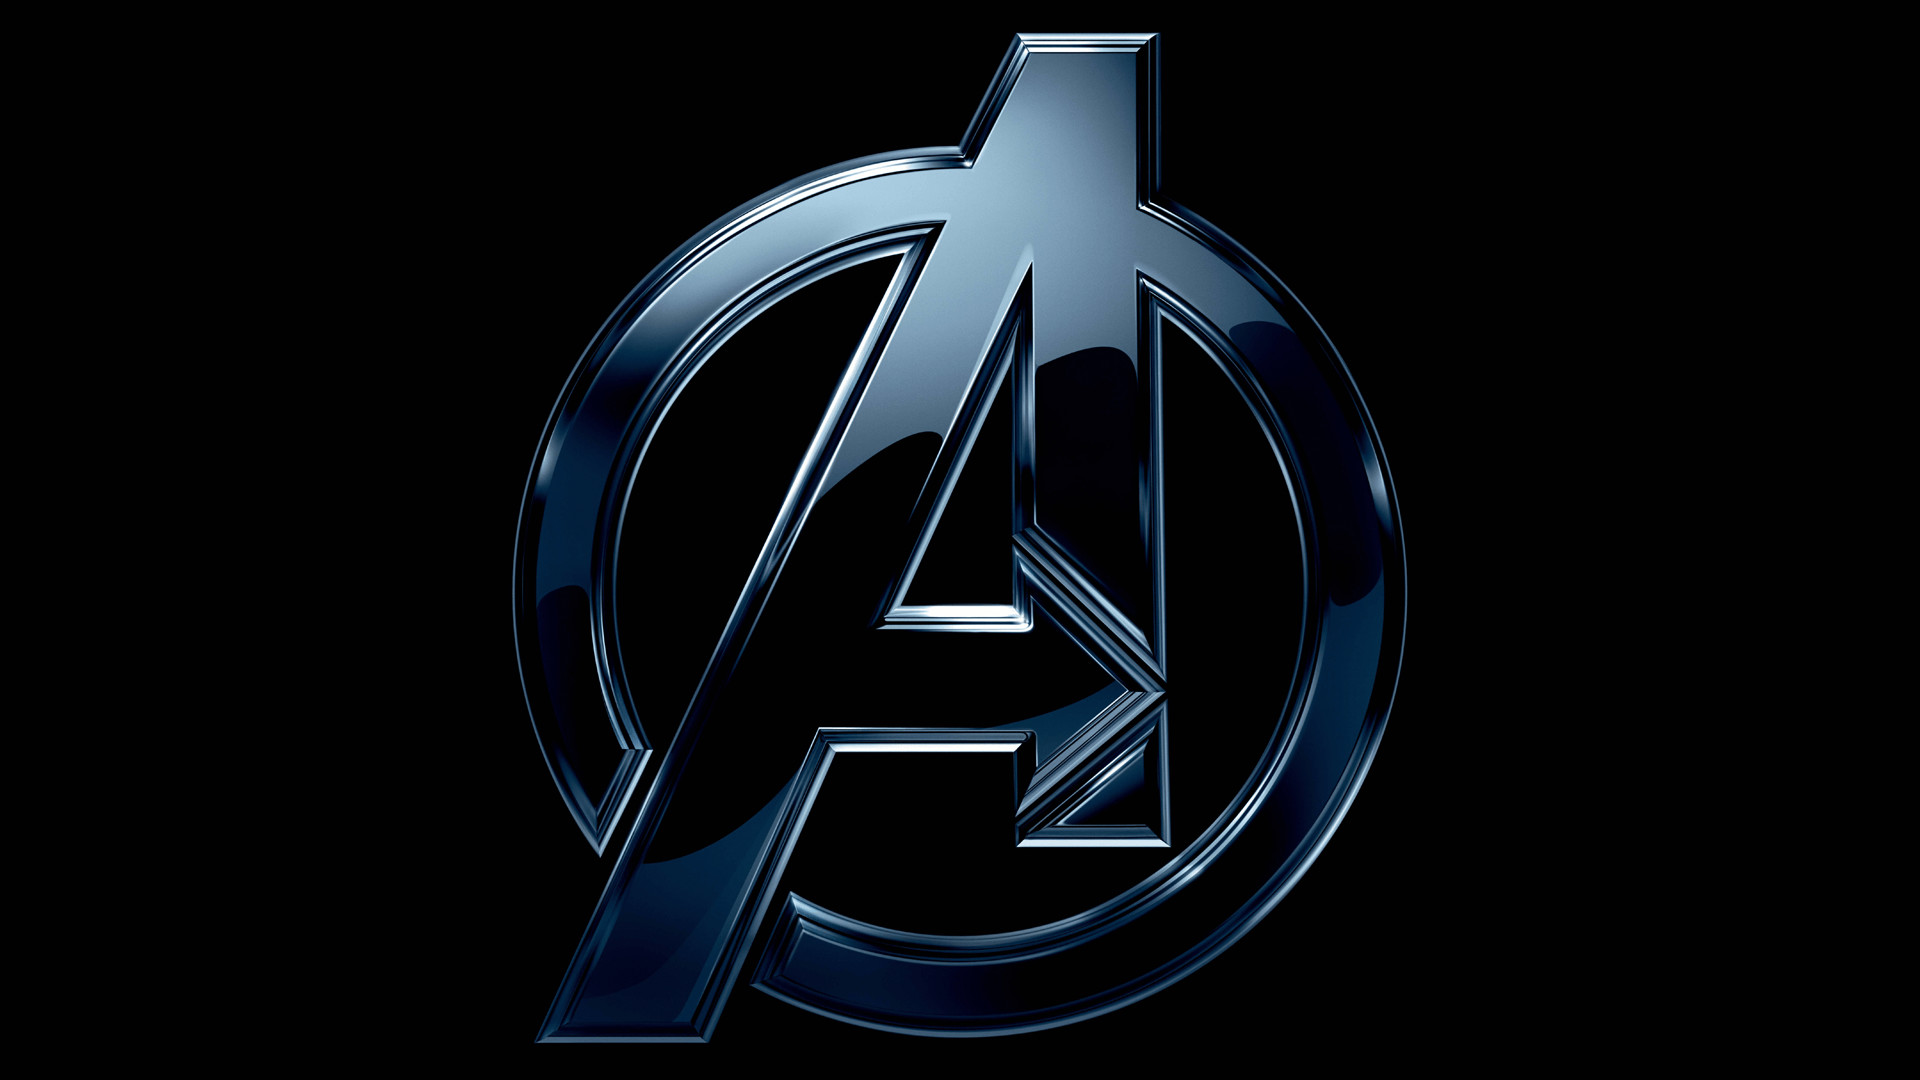 1920x1080 The Avengers Logo by Wolverine080976 on DeviantArt